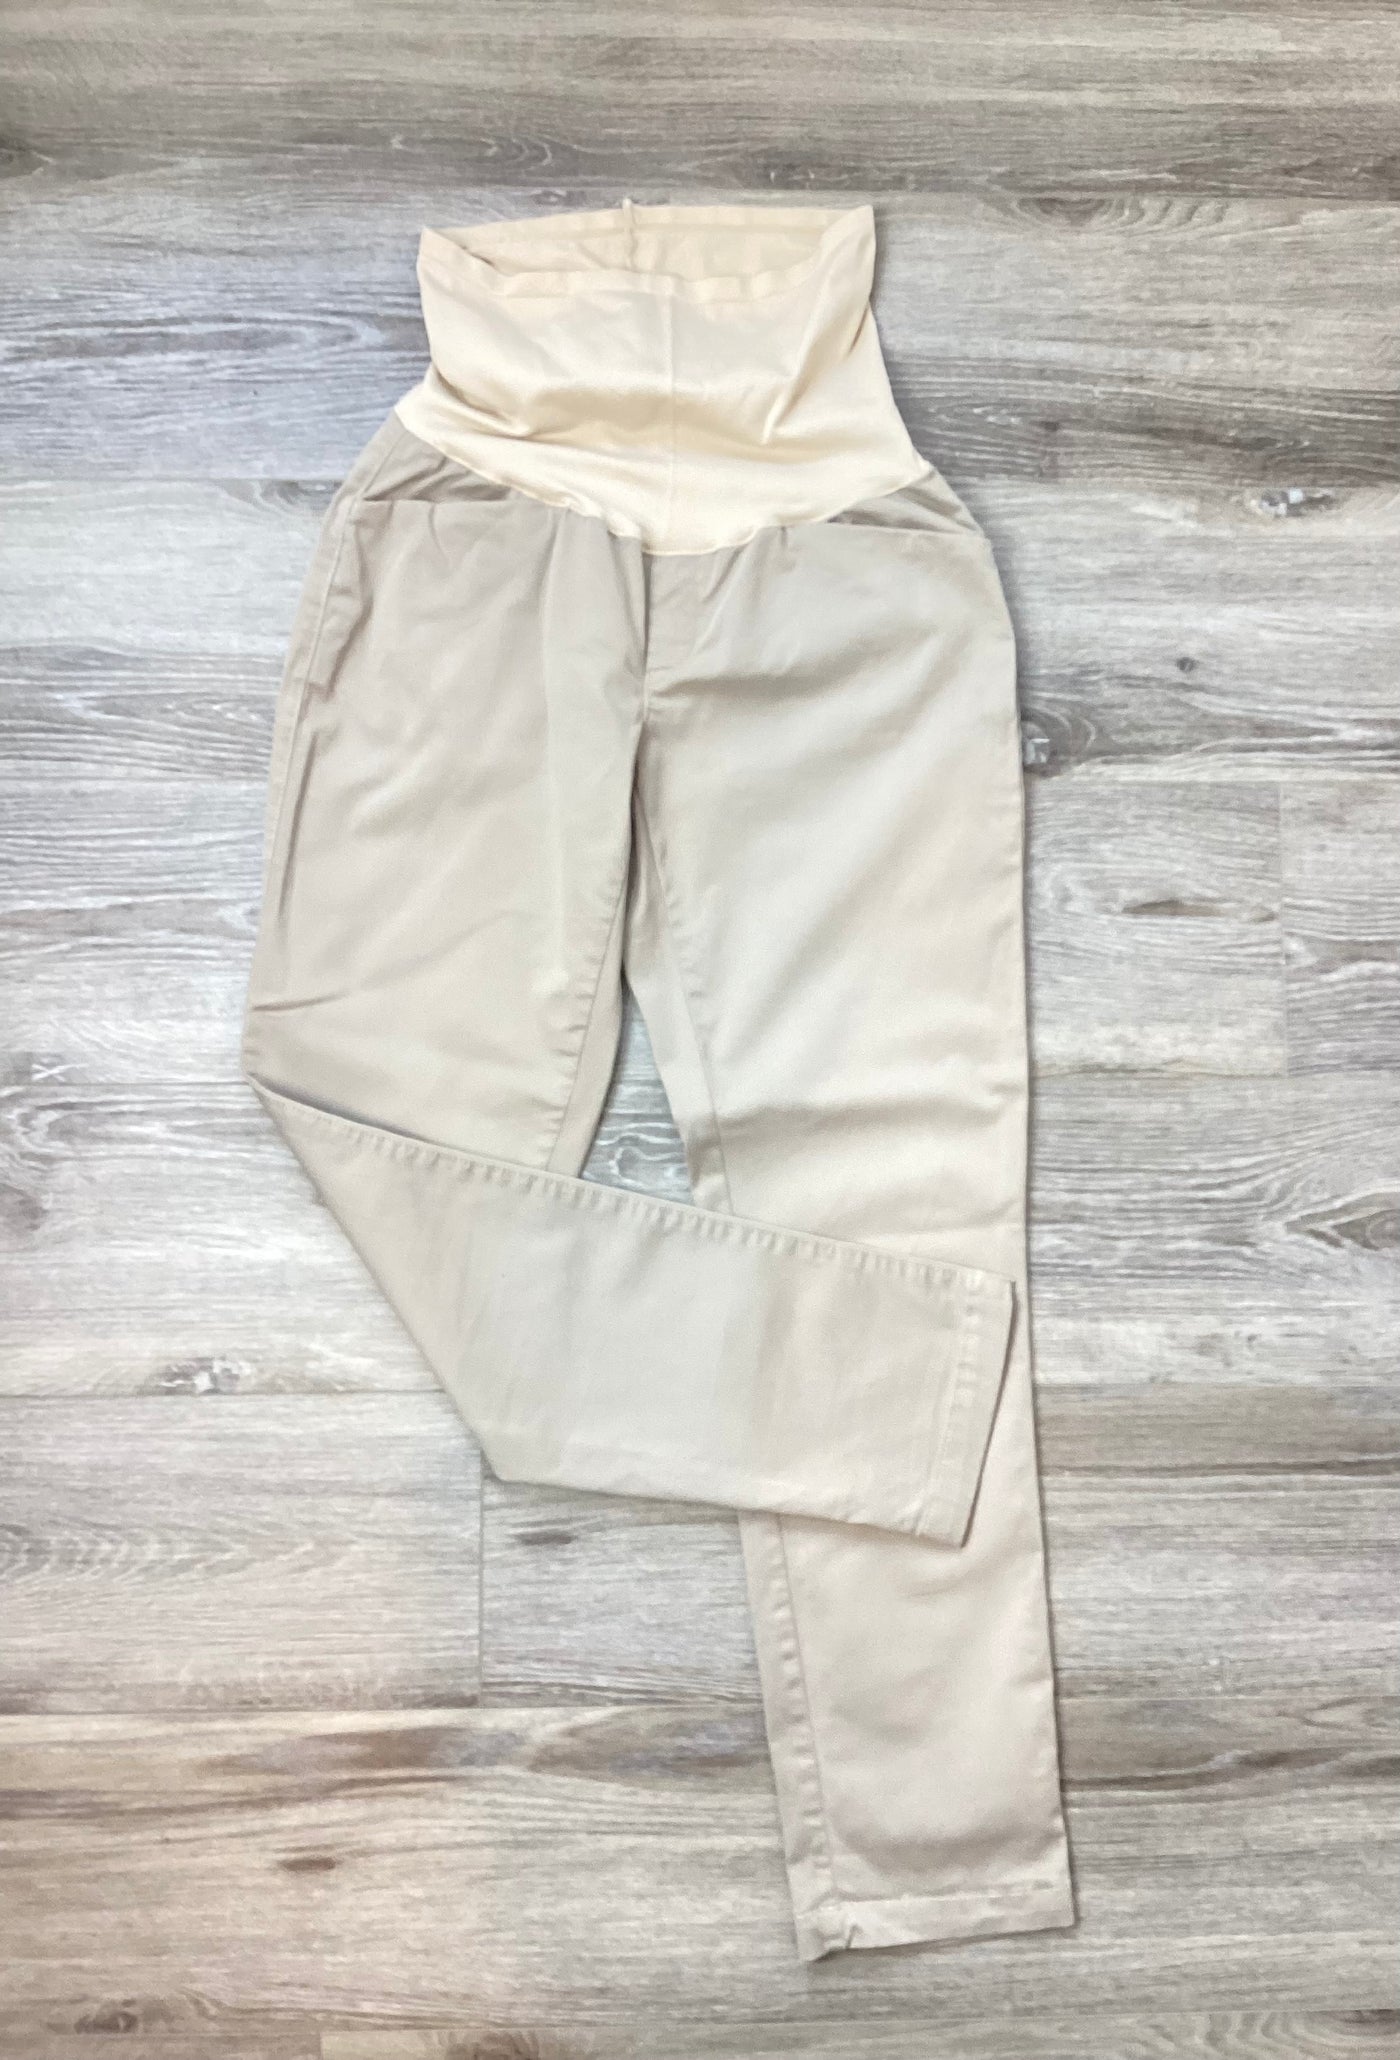 Gap Maternity camel overbump chino style trousers - Size 2 (Approx UK 10)